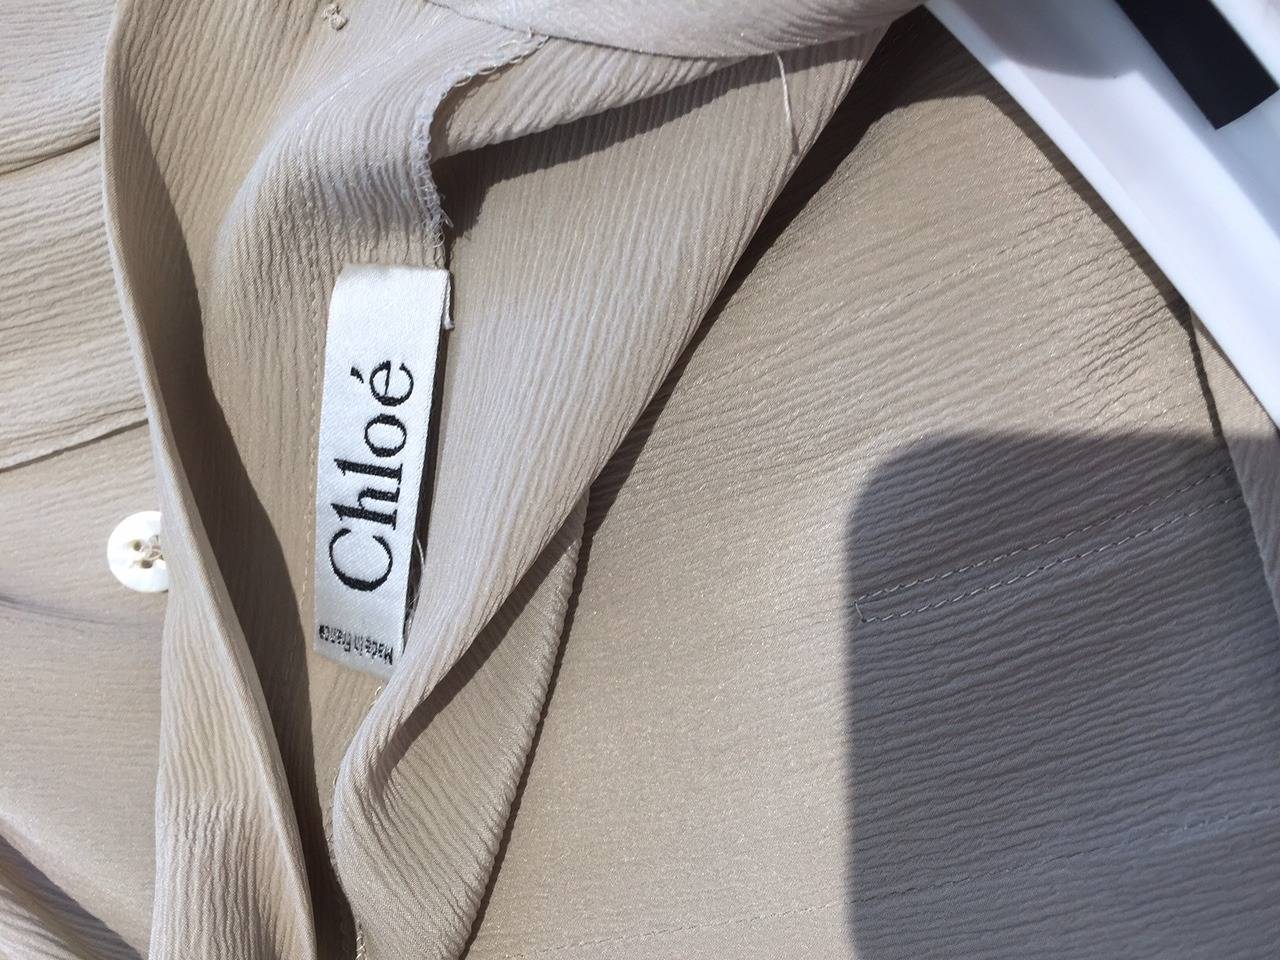 It is clear that Karl Lagerfeld was referencing a 1930s Chanel silhouette when he designed this dress for Chloe. Its cream and black butterfly sleeves, loose, paneled bodice, and neat pleats that open just above the knee all recall the innovations